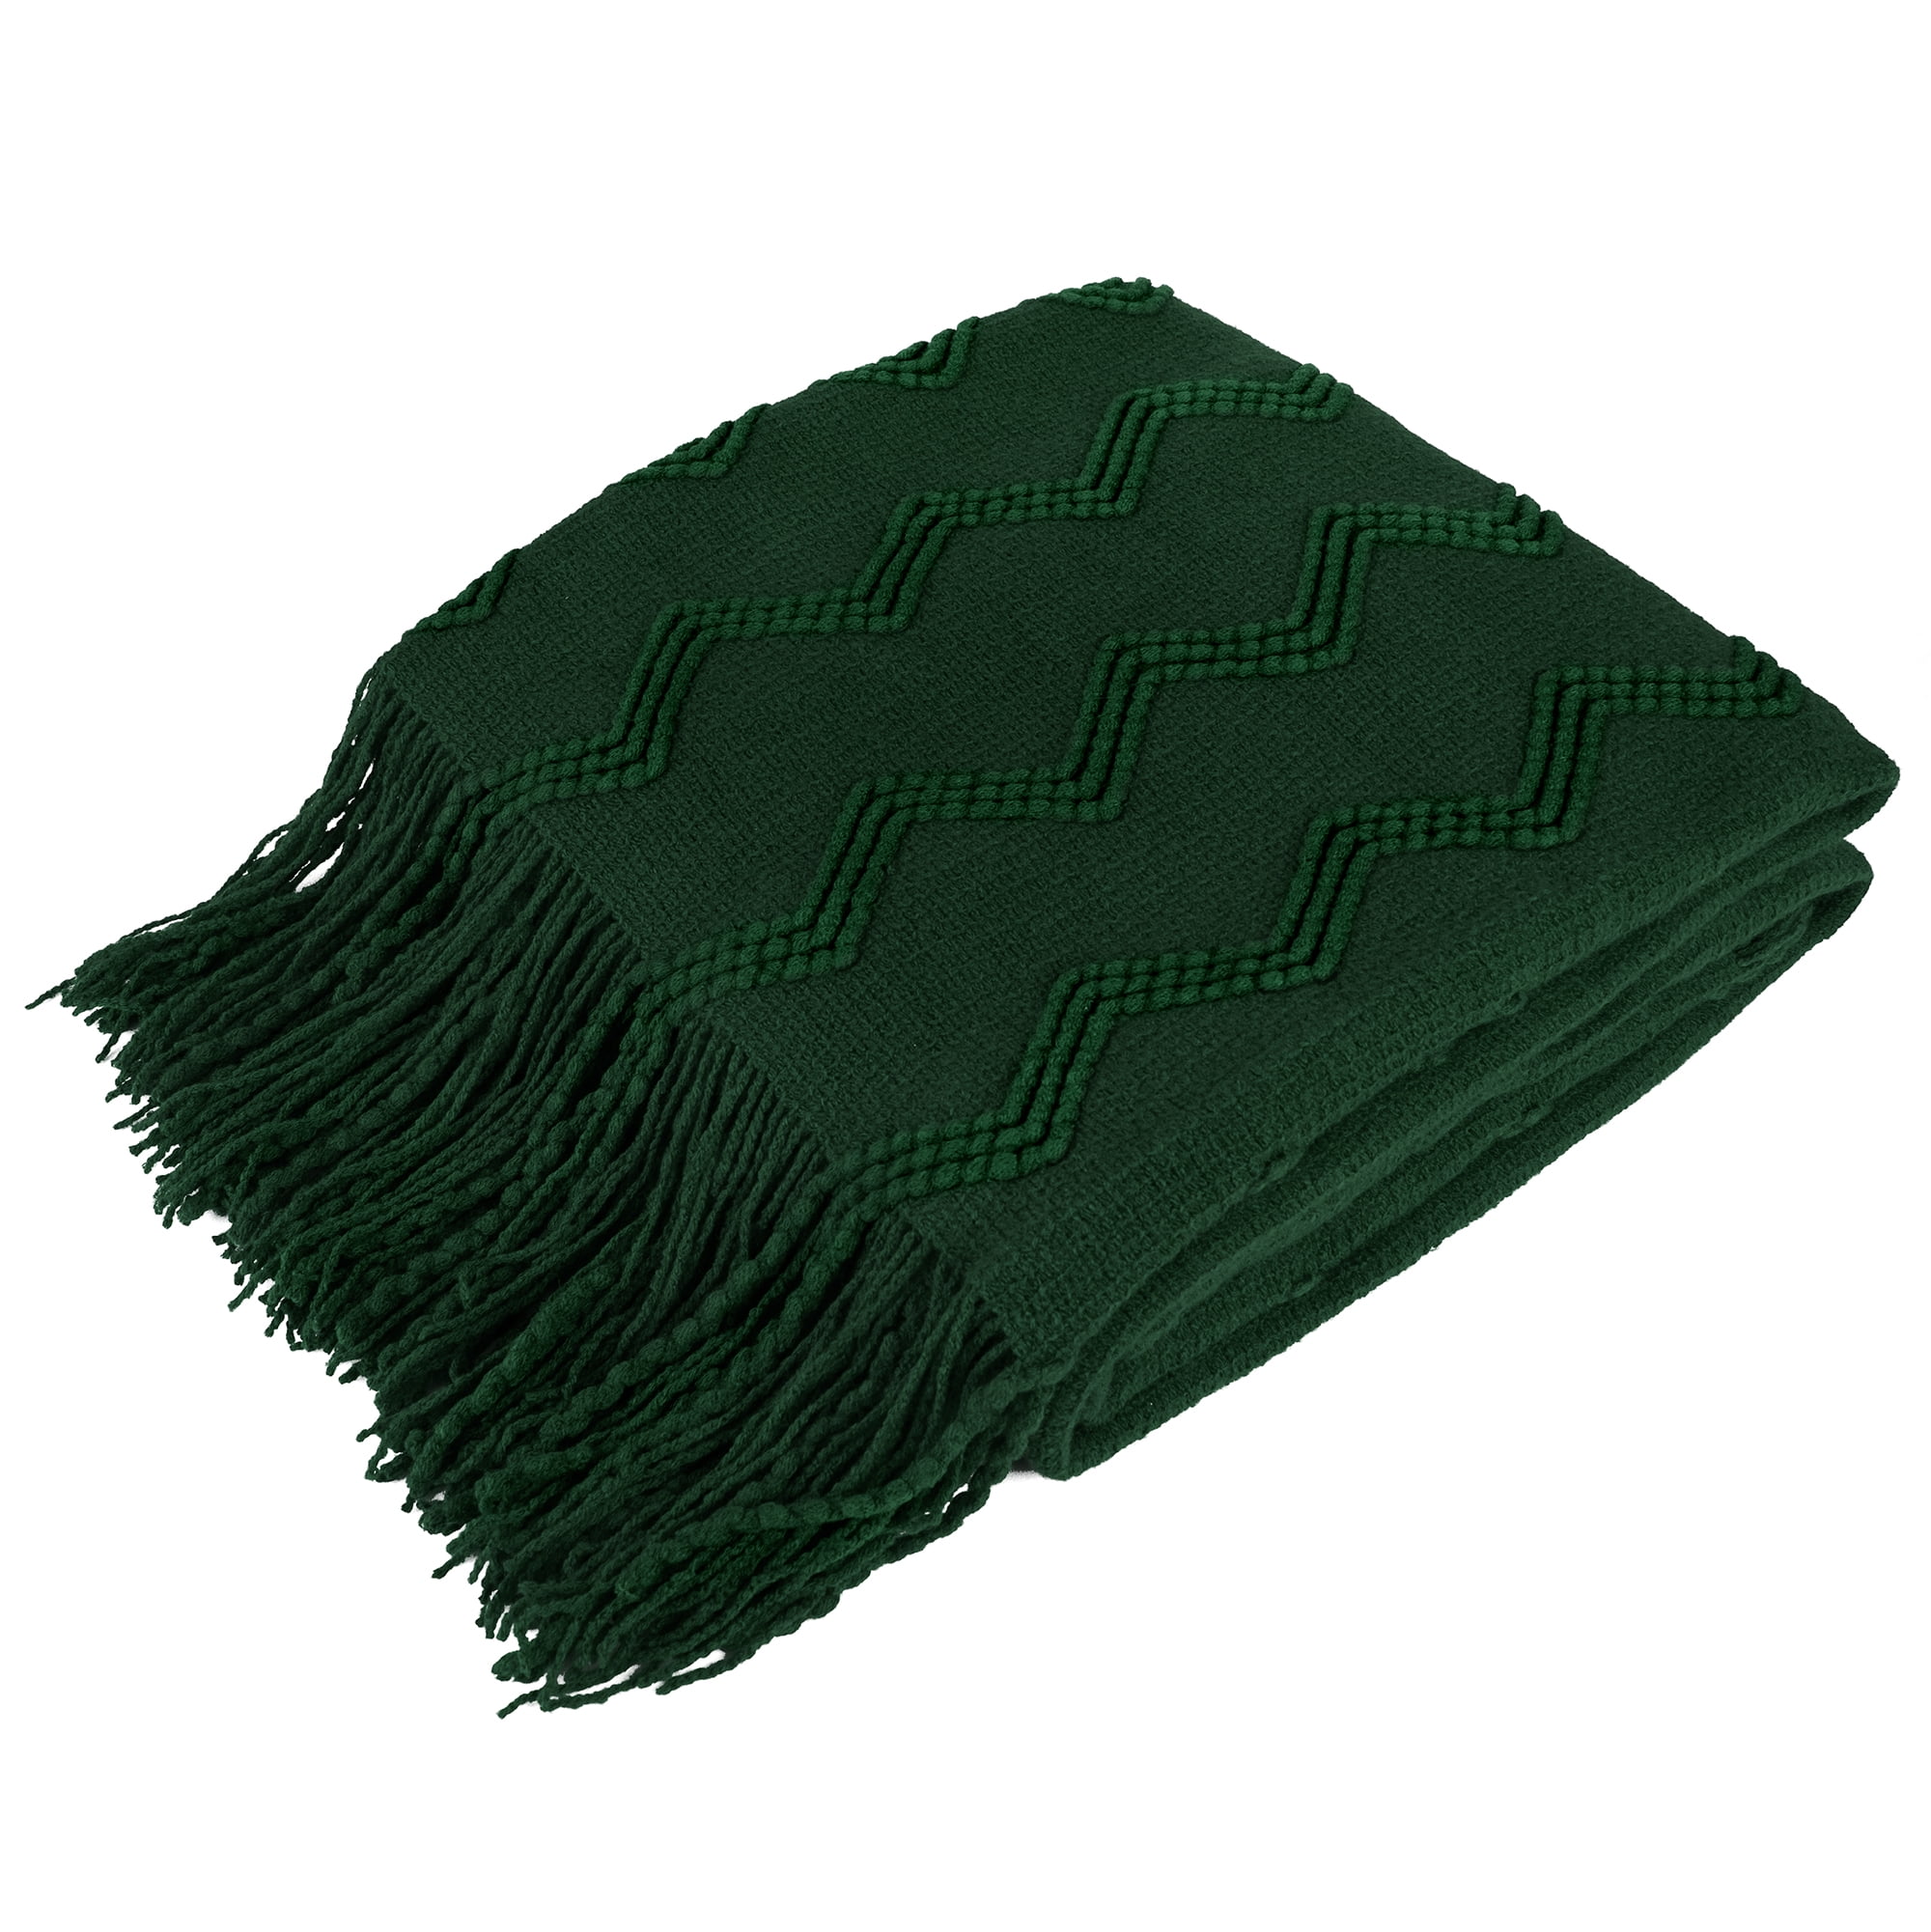 Bed Throws in 5 Sizes 100% Cotton Sofa Throws Waffle Forest Green Honeycomb 